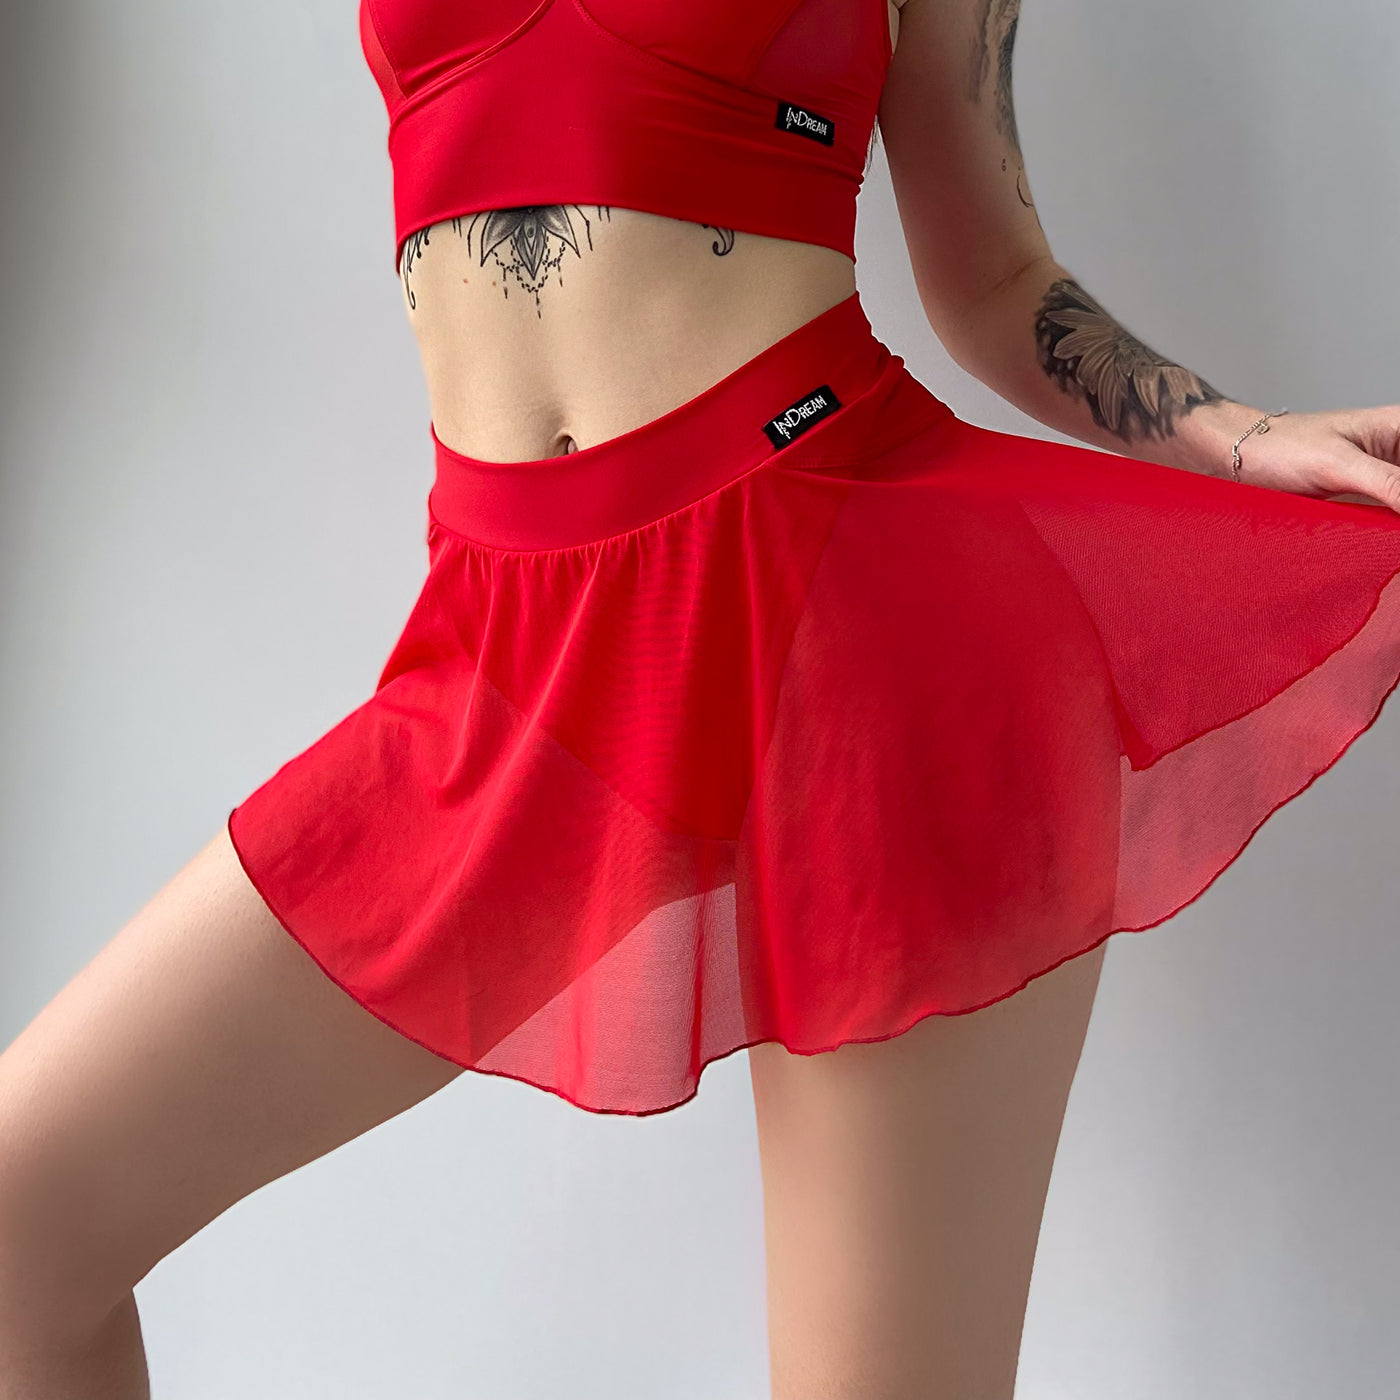 InDreamWear Cheeky Skirt Shorts - BRIGHT RED